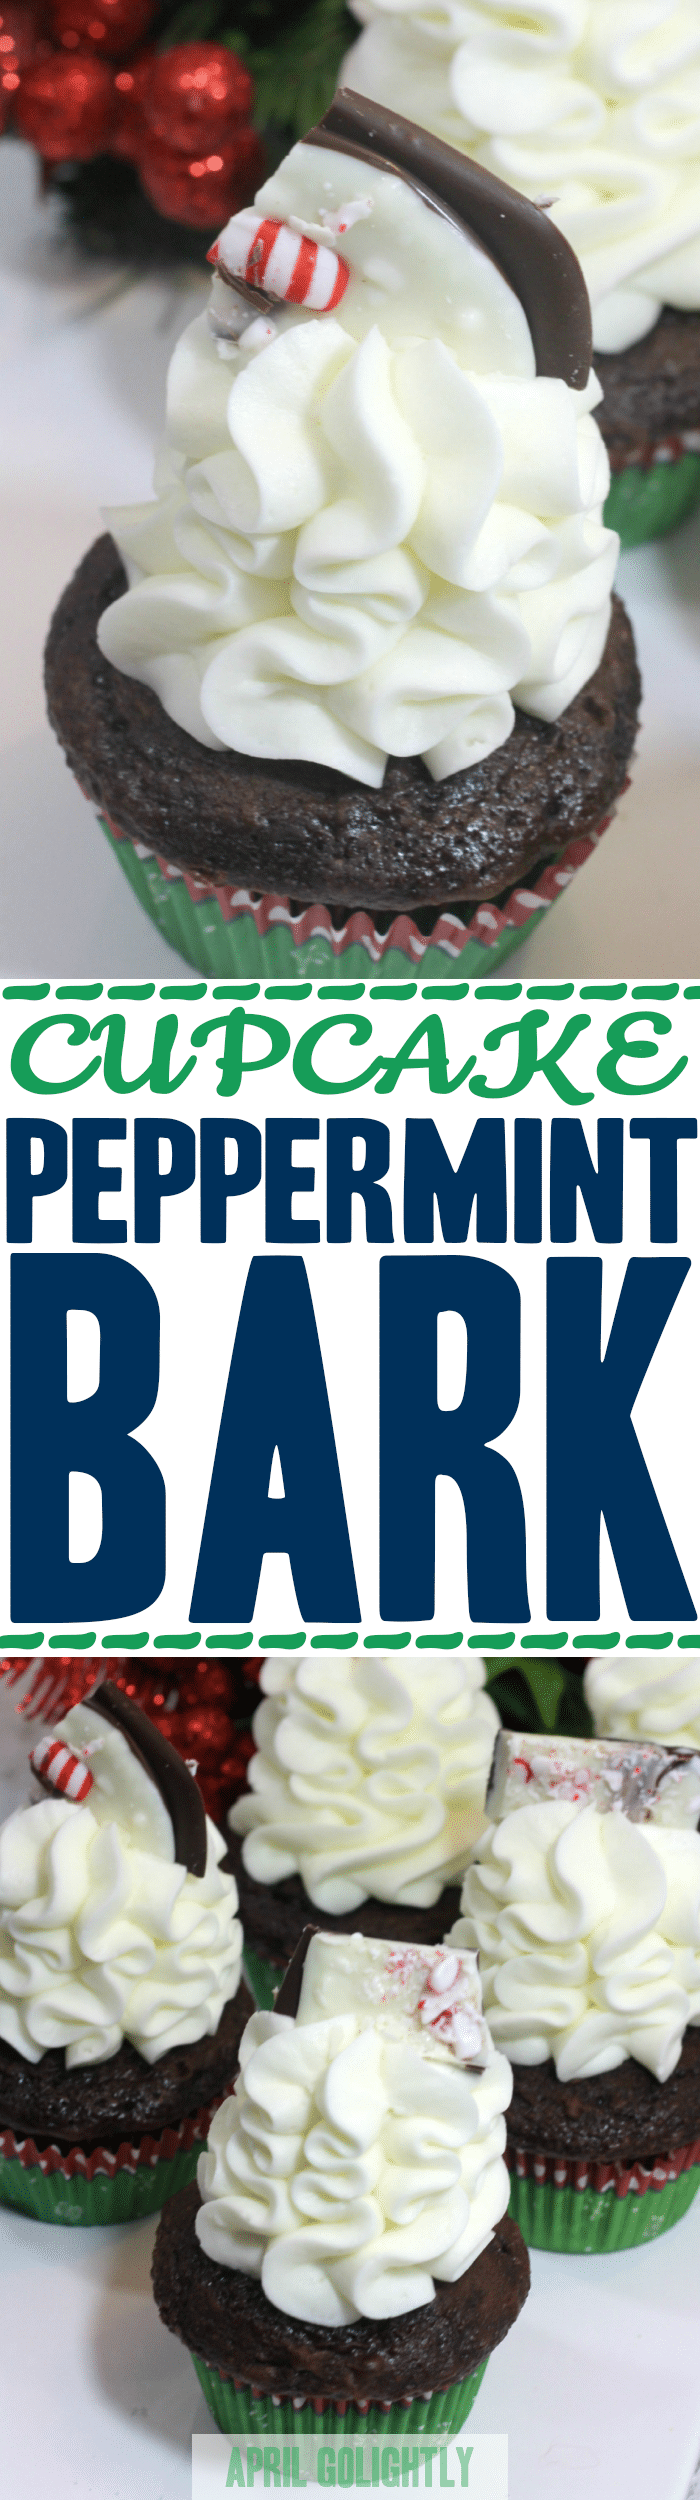 Peppermint Bark Cupcake Recipe from April Golightly - perfect for the holidays and Christmas cupcakes that you will love for a festive dessert